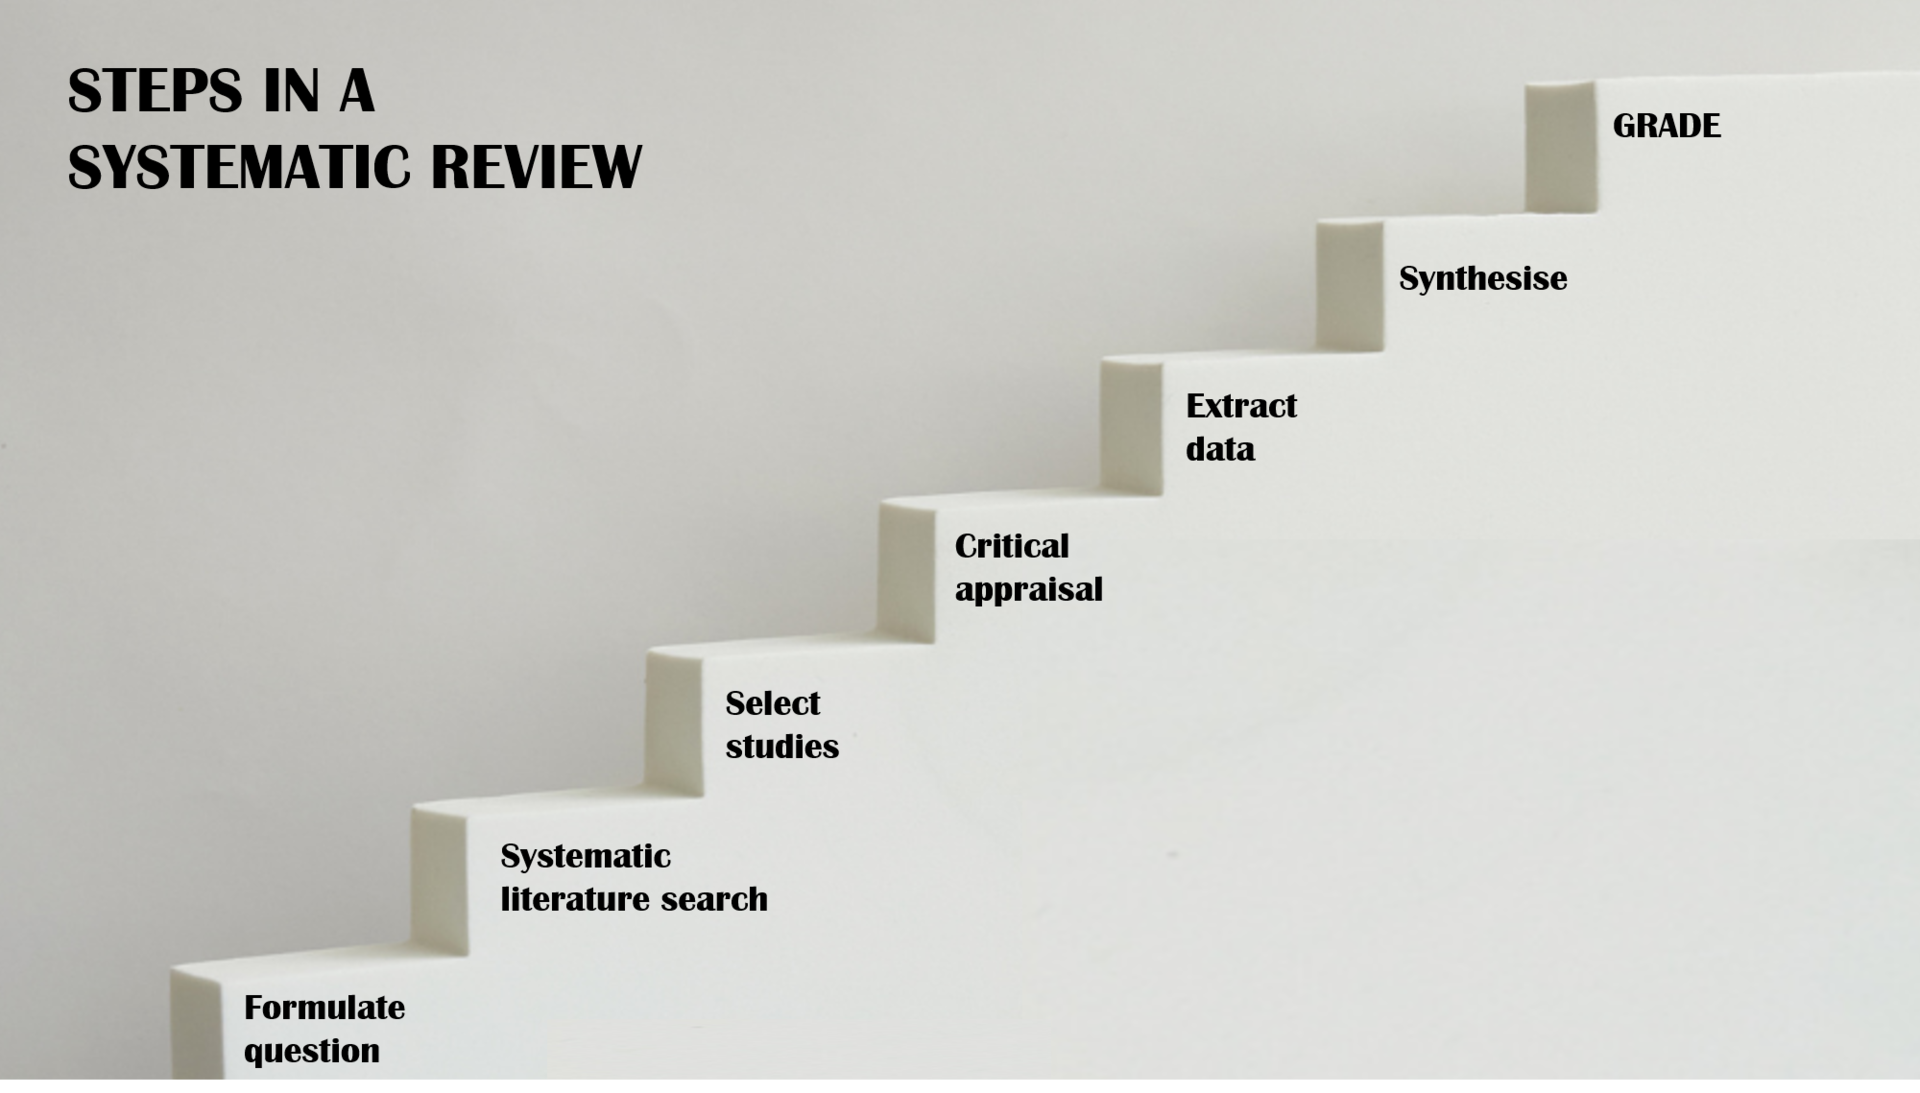 Picture that shows the steps in a systematic review: formulate question, systematic literature search, select studies, critical appraisal,  extract data, synthesize, GRADE. 